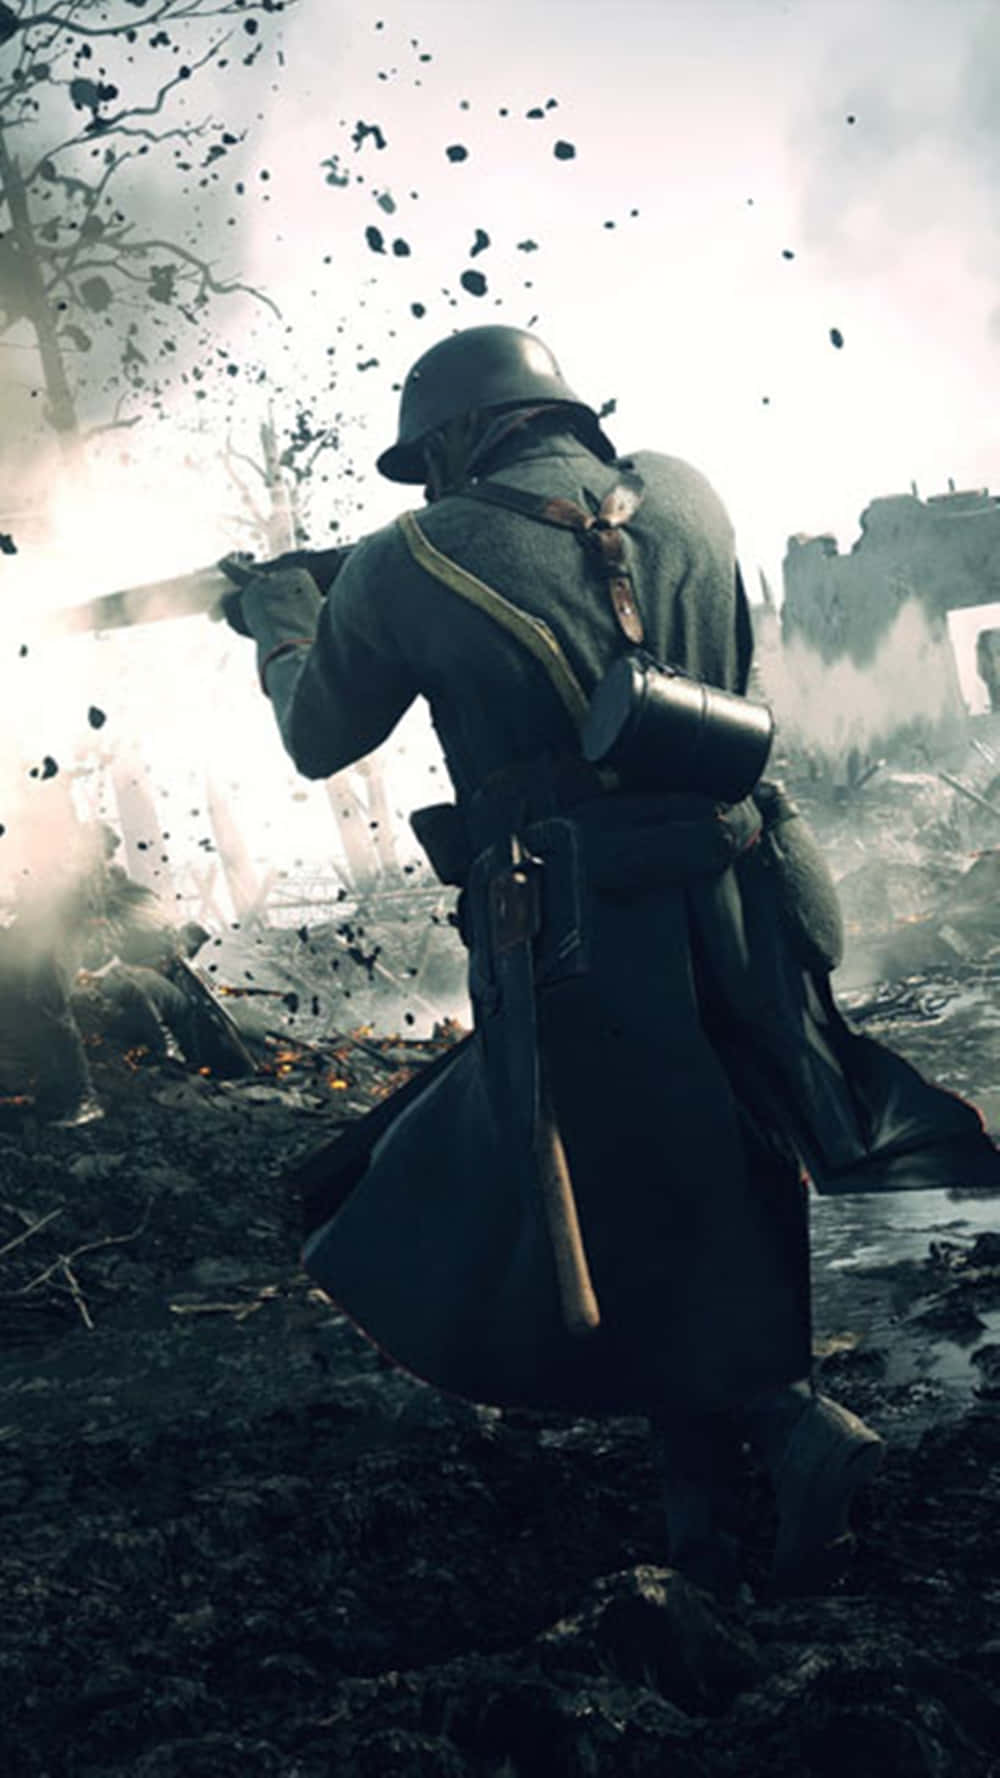 A Soldier Is Shooting A Gun In A Battlefield Background